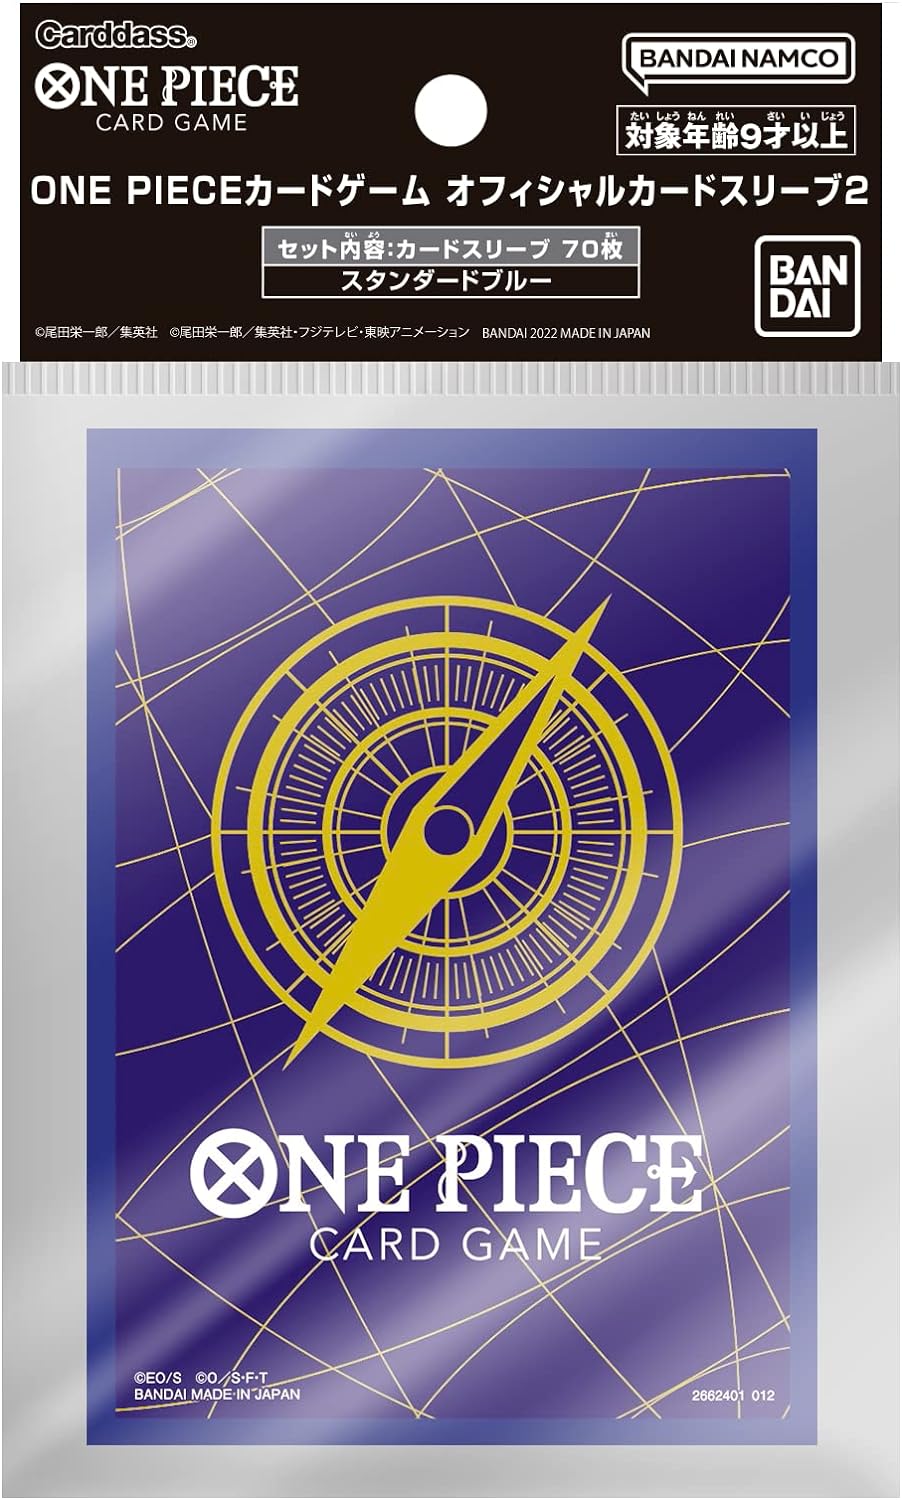 Front Cover of One Piece Card Game Official Card Sleeves Set 2: Standard Blue. Image Source: Bandai Namco